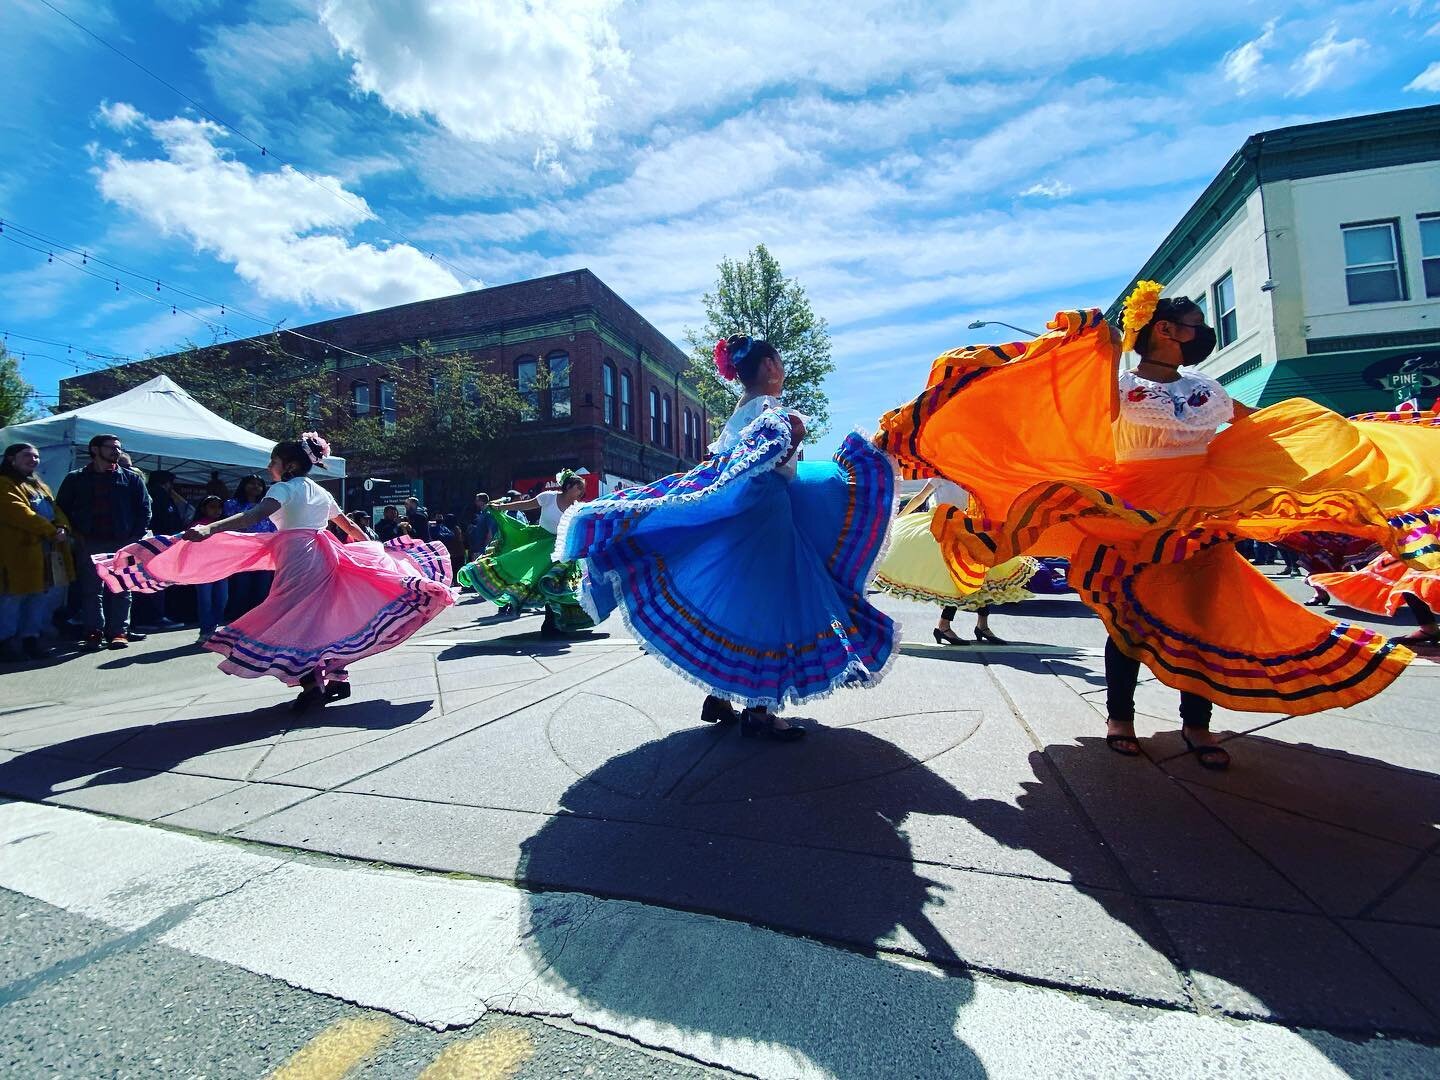 Big ups to LaVenture Middle School&rsquo;s Baile Folkl&oacute;rico and their spectacular show. Thank you for showcasing your fabulous talent at the @tulipfestivalstreetfair 🤩